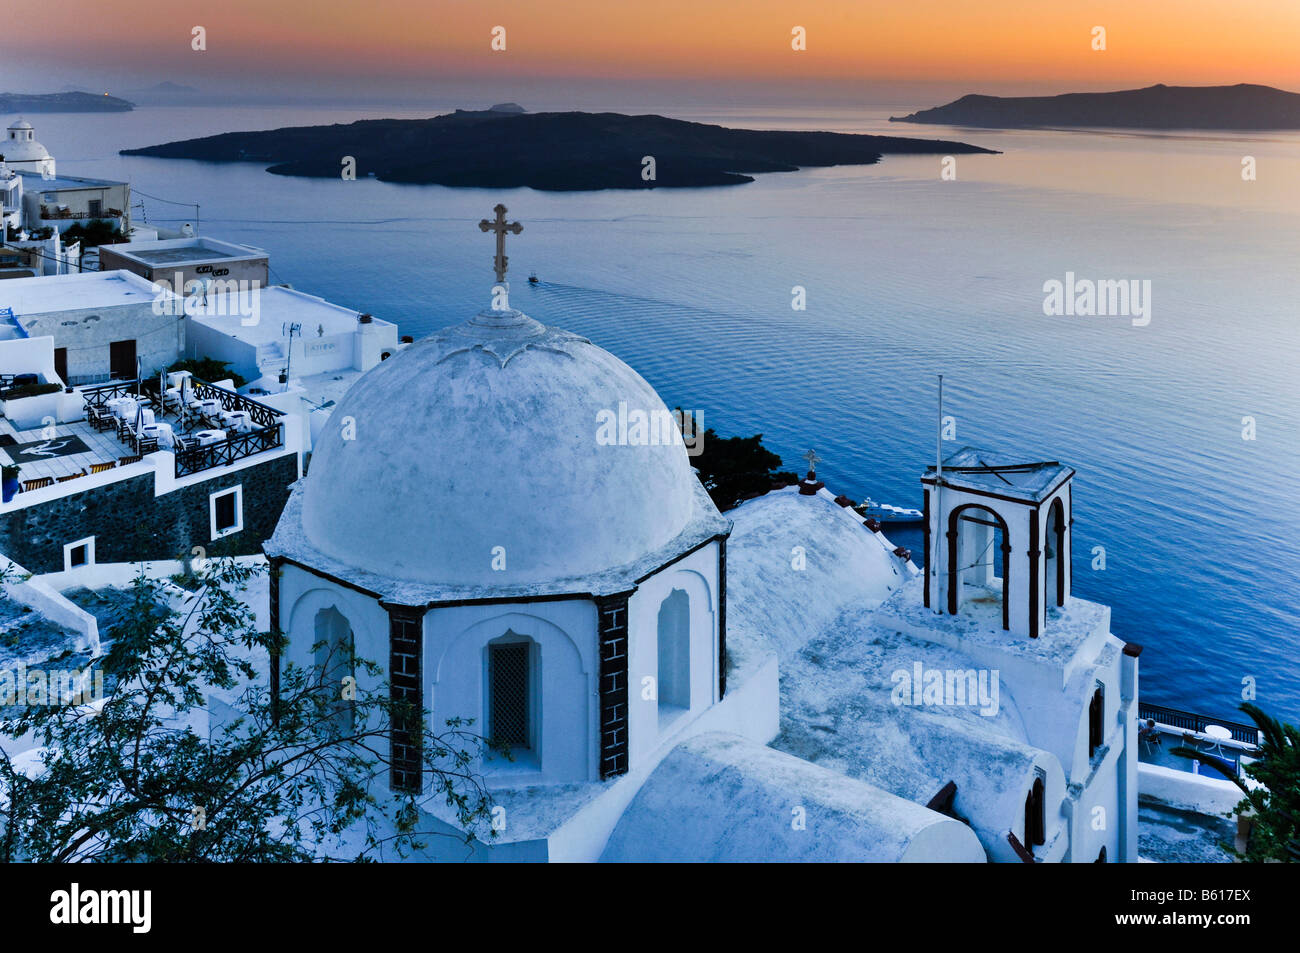 White domed church with a cross at sunset in front of the sea and the volcanic island of Nea Kameni, Santorini, Cyclades, Greece Stock Photo